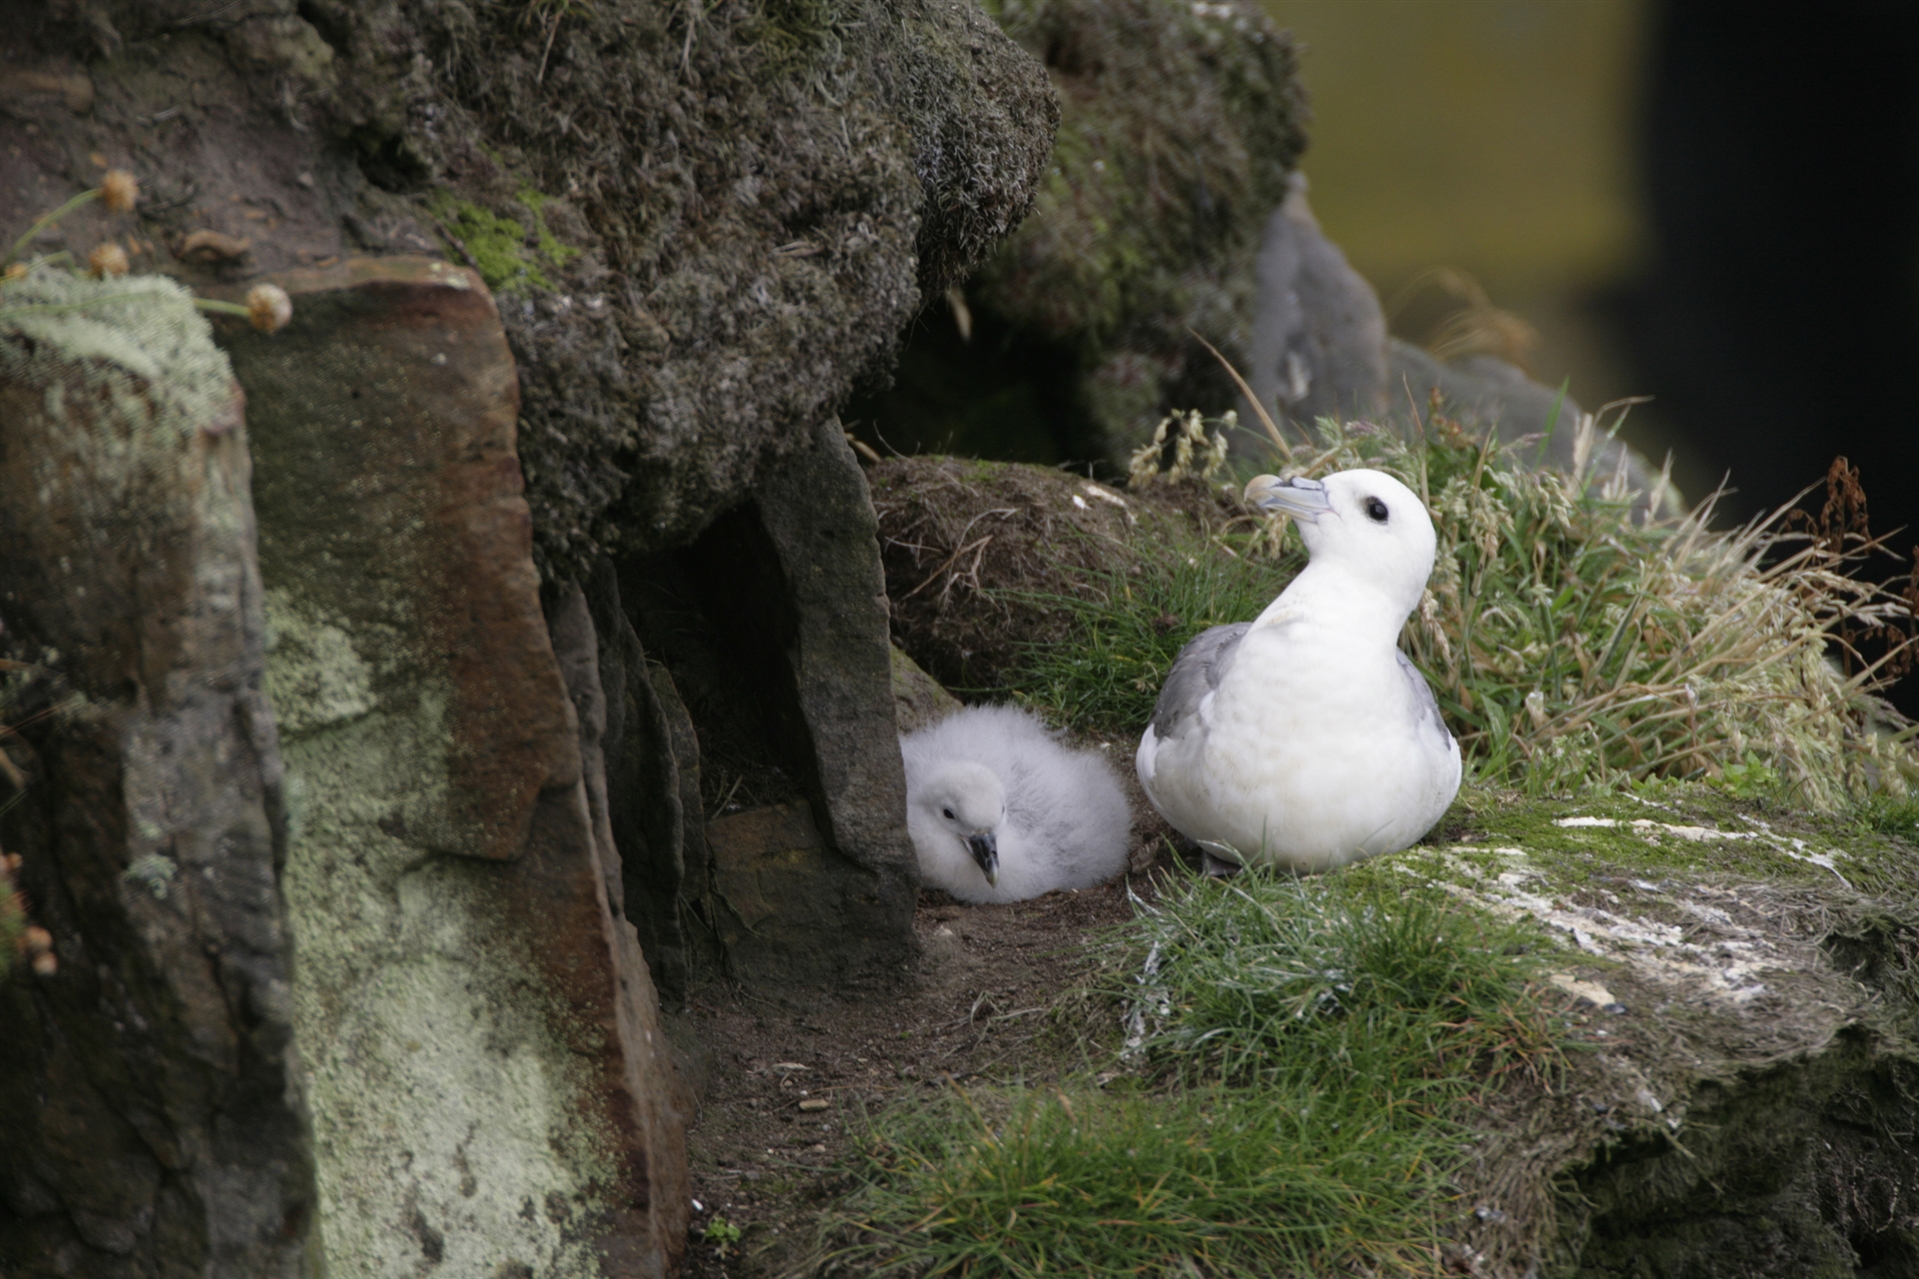 A Fulmar and its chick perched on a grassy cliffside.